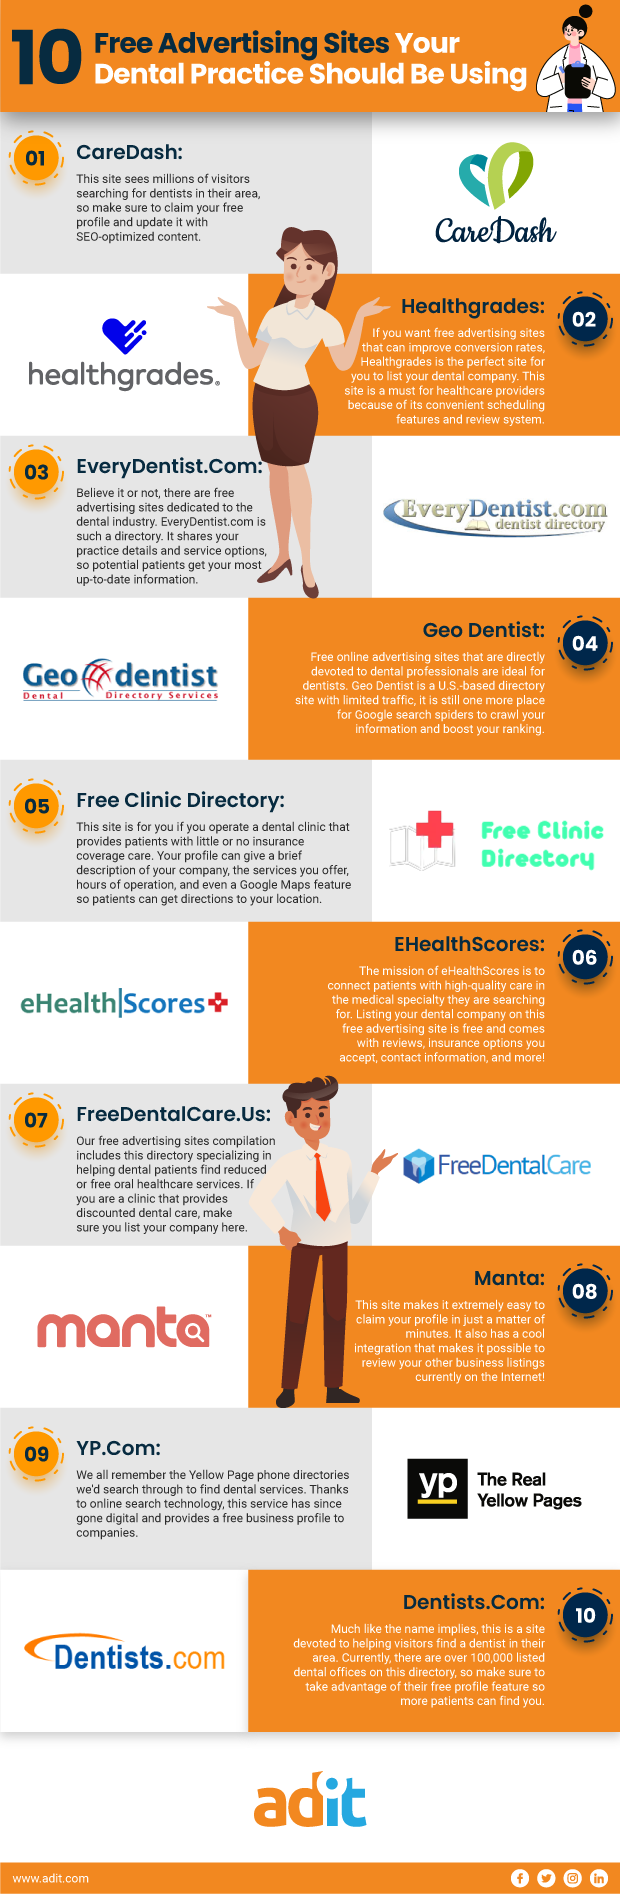 10 Free Advertising Sites Your Dental Practice Should Be Using